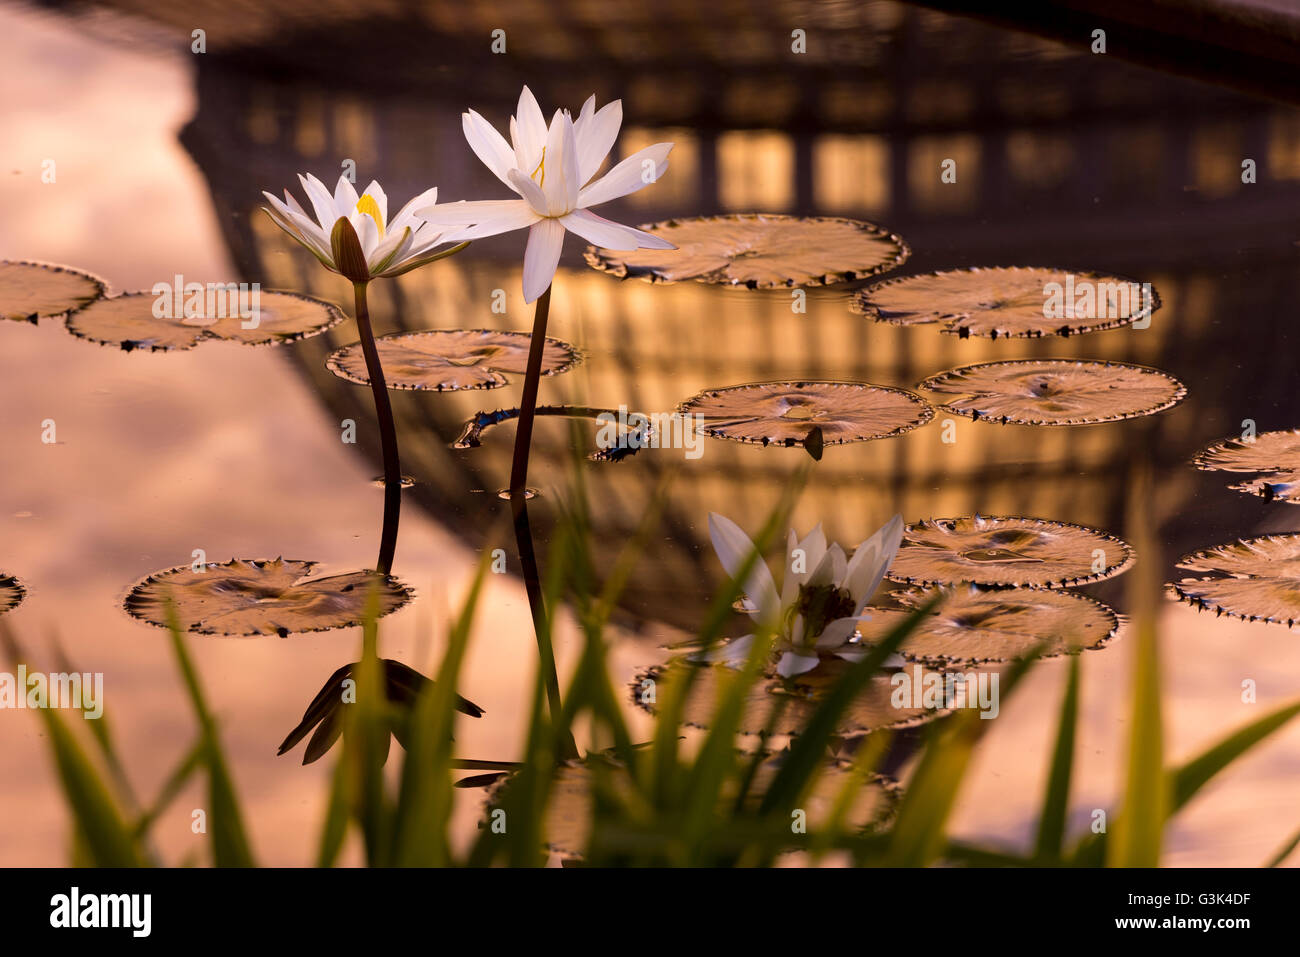 Tropical water lily flowers and pads with colorful sunrise and conservatory dome reflected in water. Stock Photo